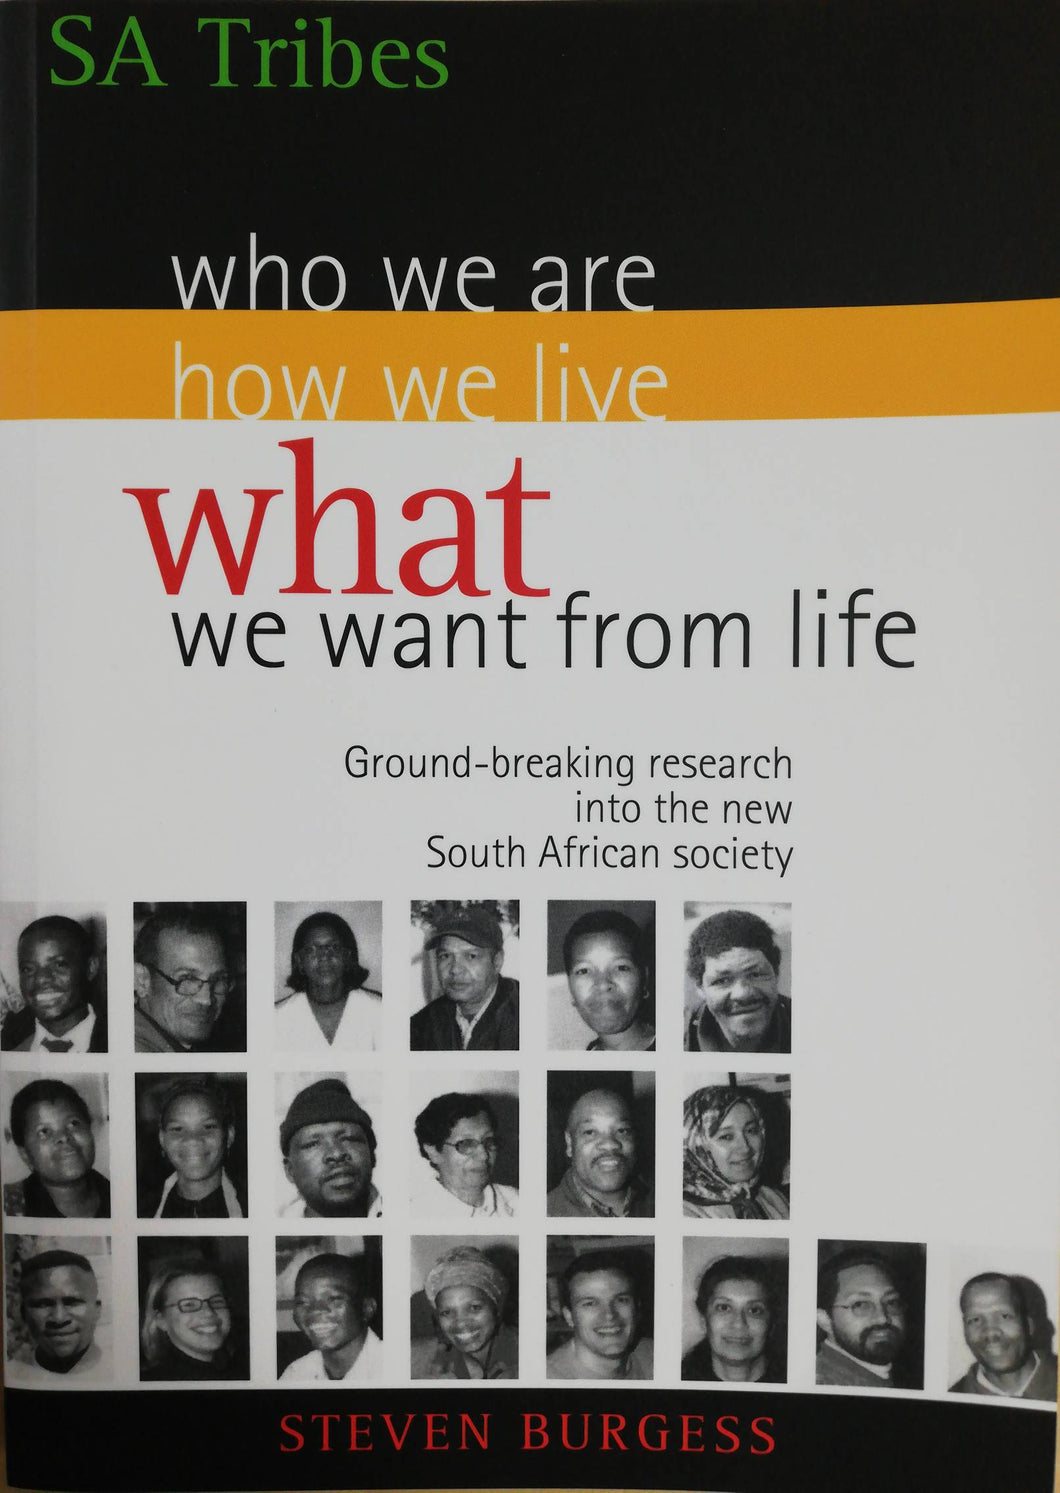 SA TRIBES: Who we are, how we live and what we want from life